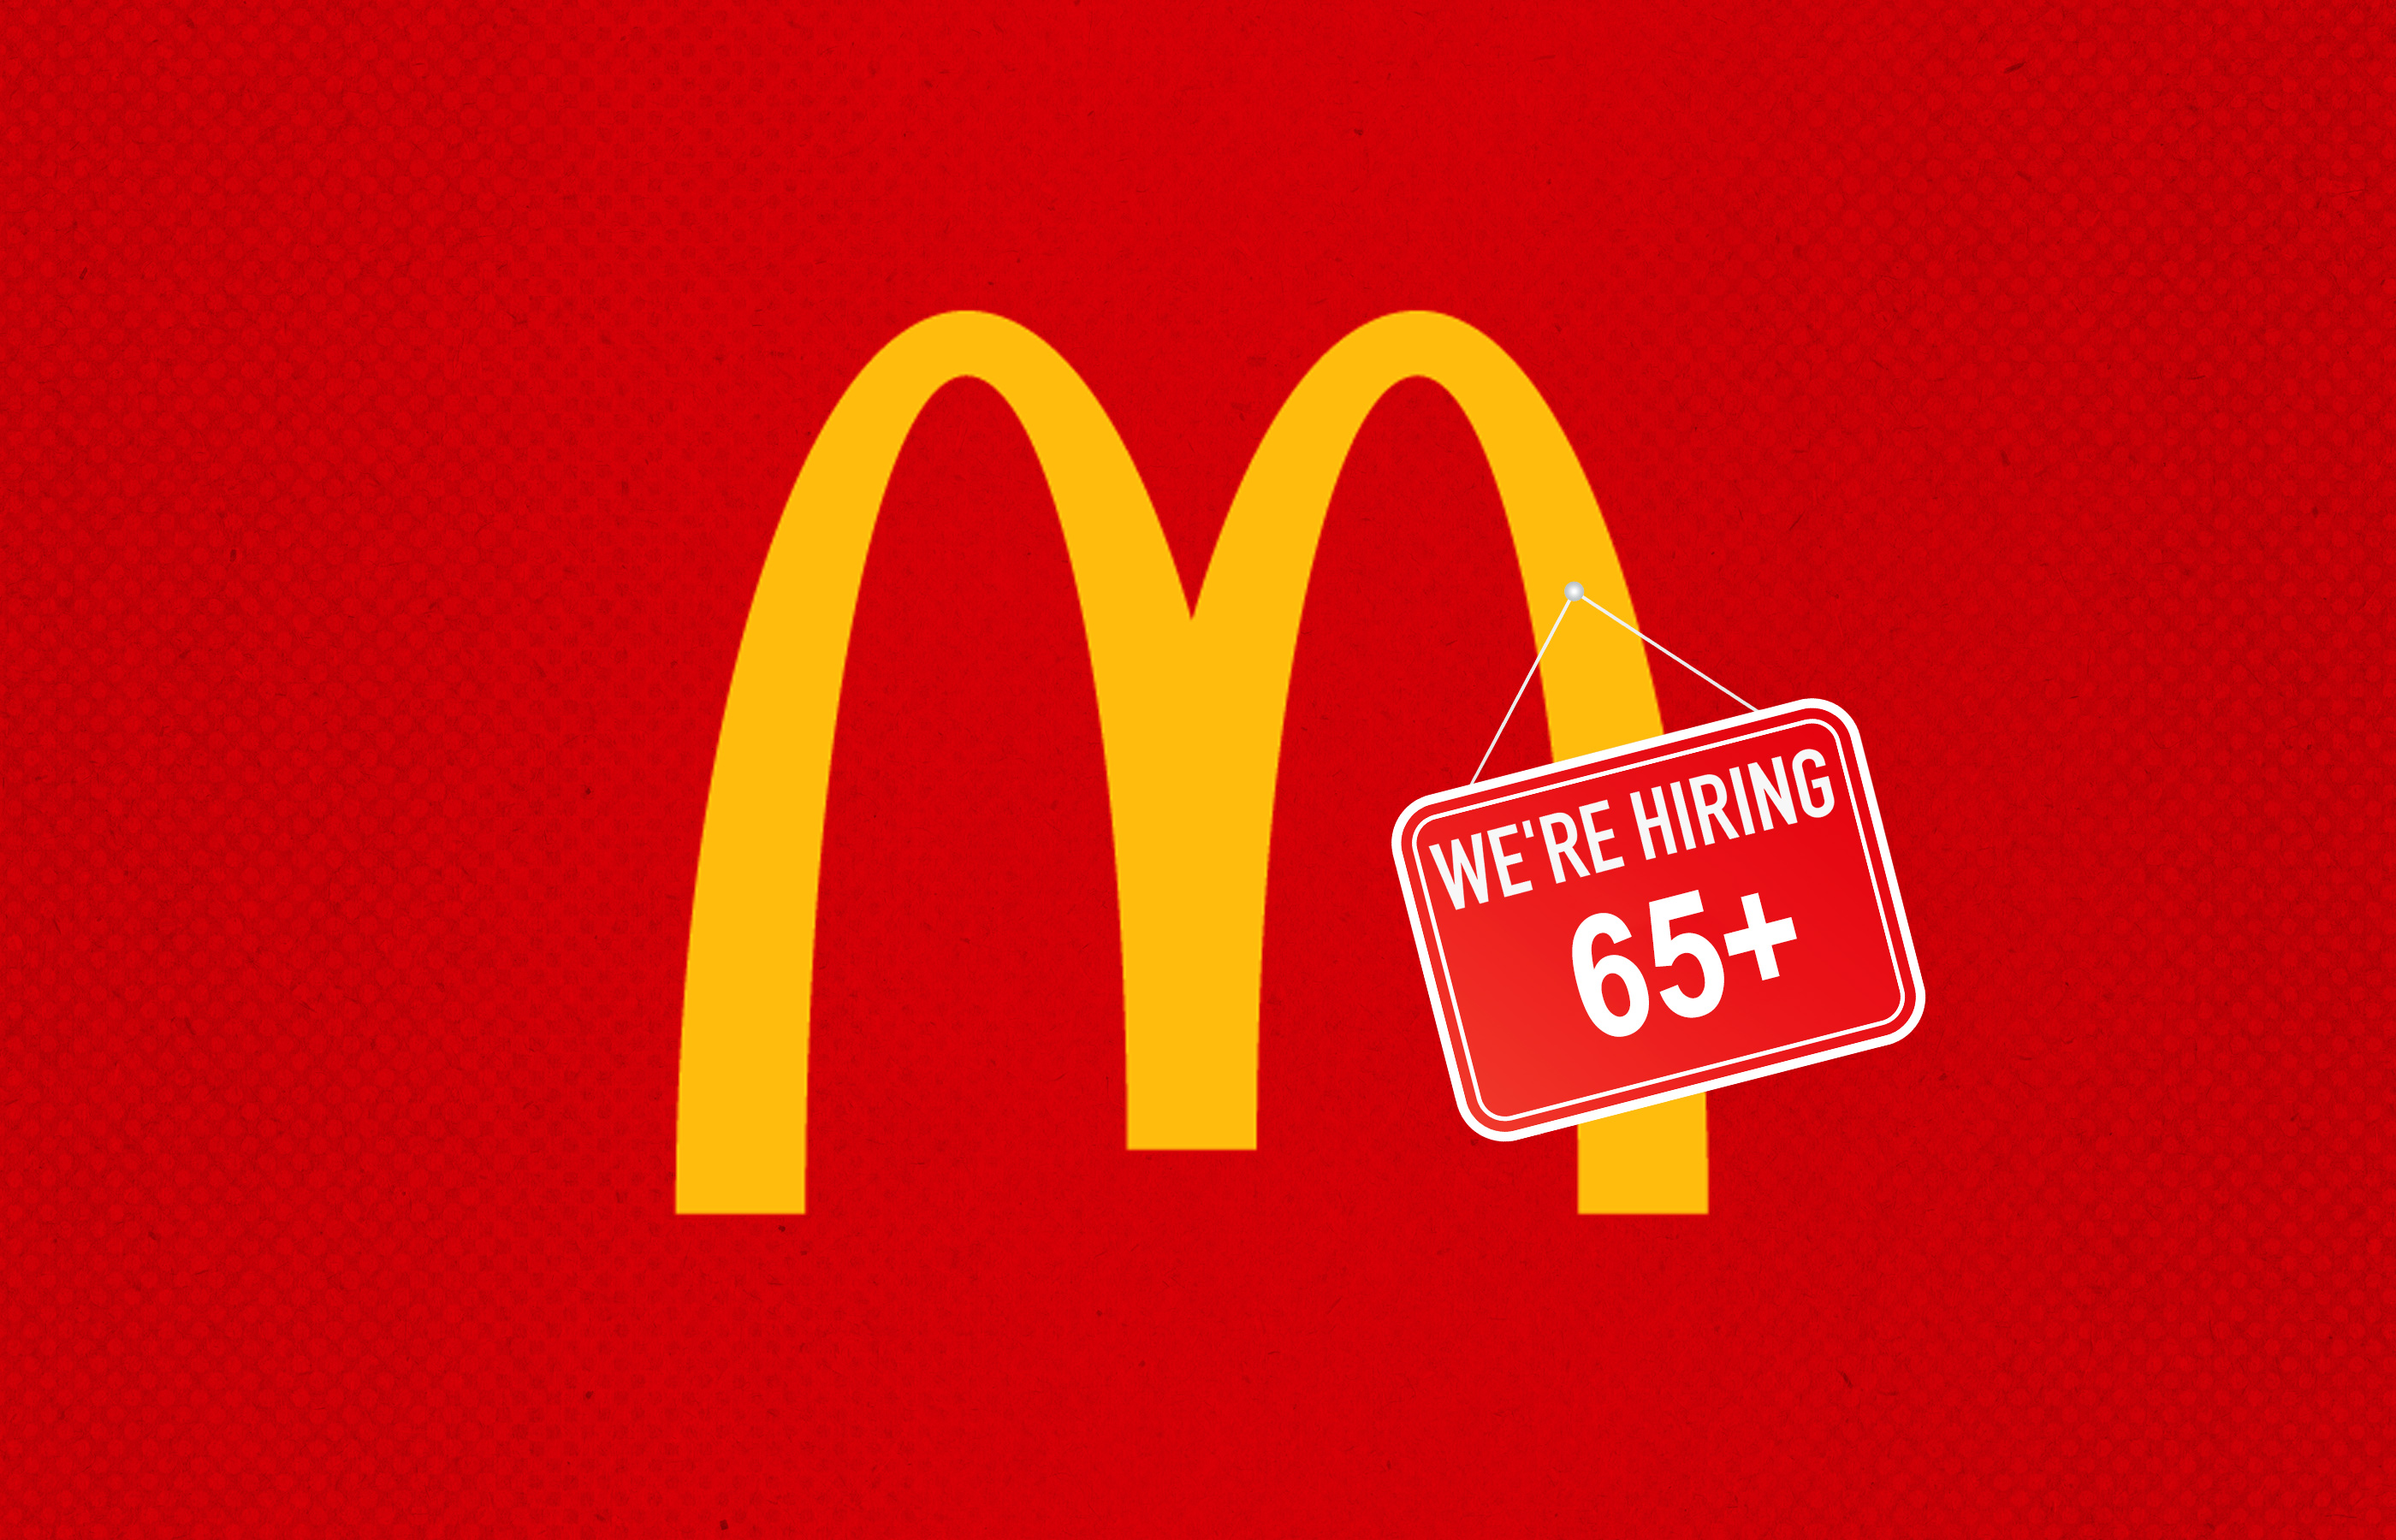 McDonald’s Has 250,000 Jobs to Fill — and It Wants to Hire Older Americans